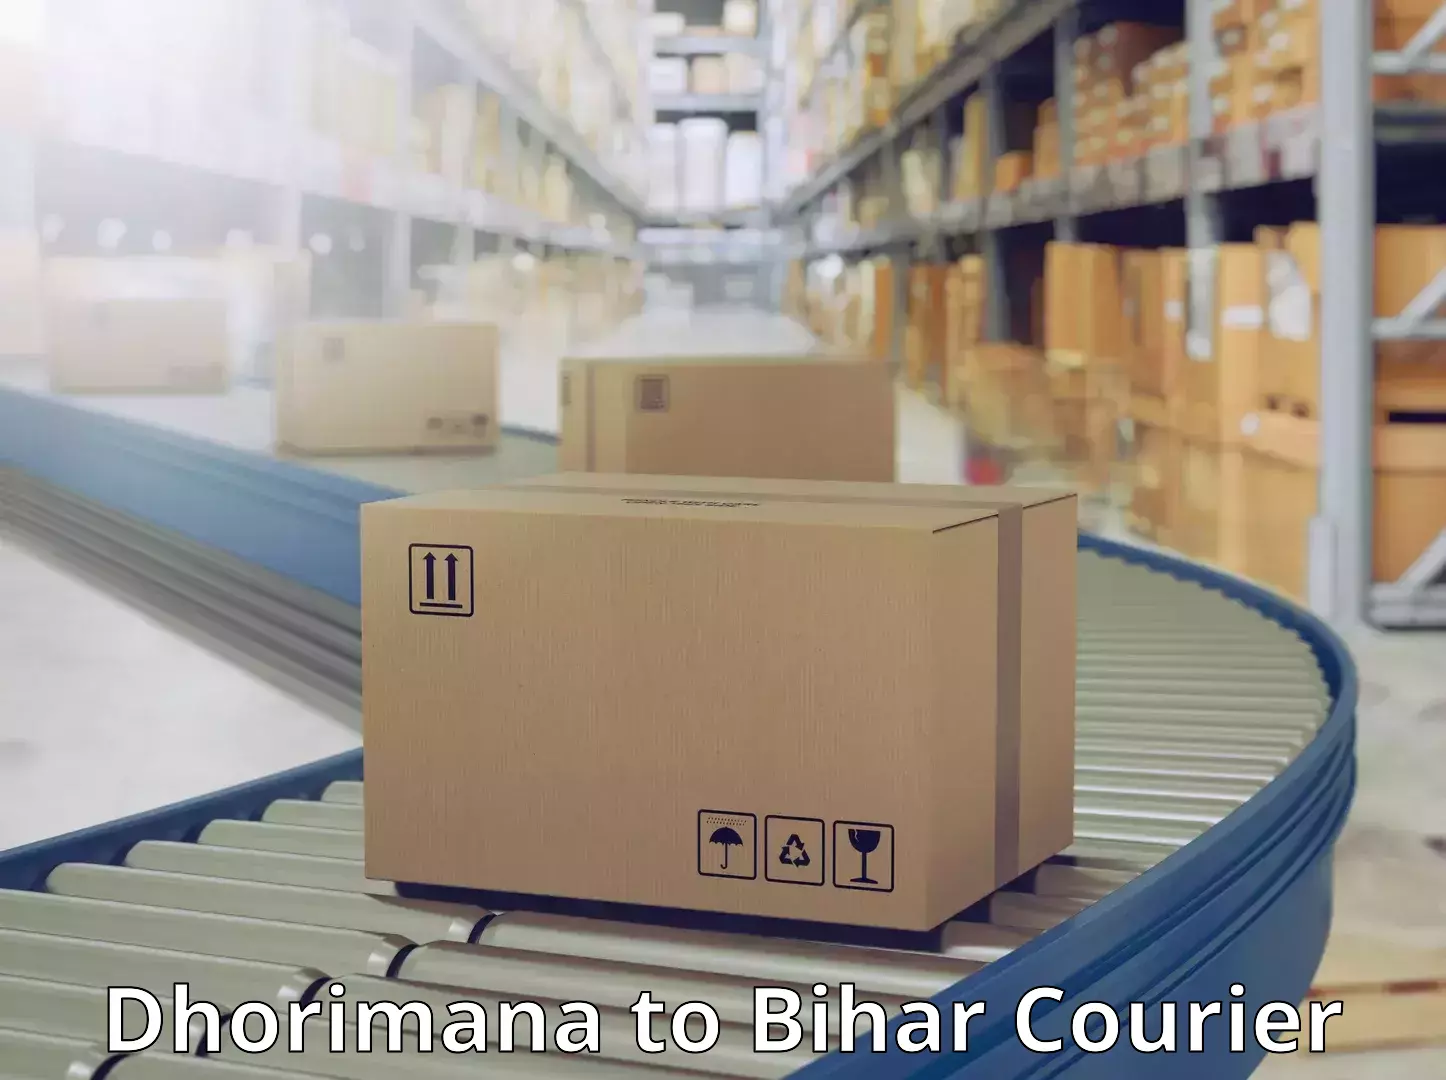 State-of-the-art courier technology Dhorimana to Mahnar Bazar